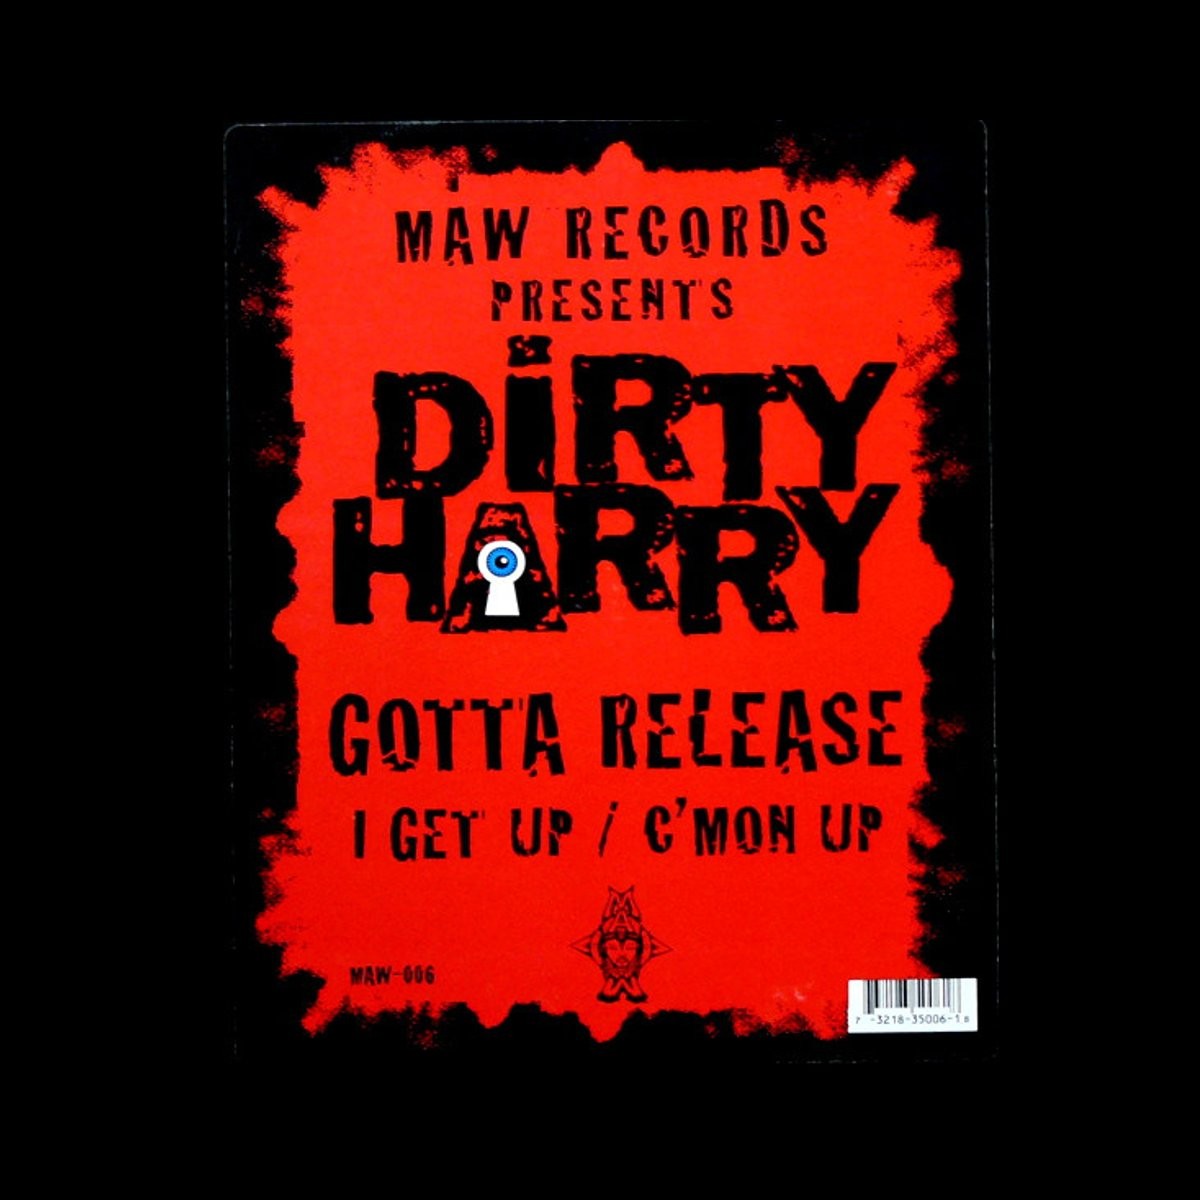 Dirty Harry - Gotta release / I get up / C'mon up (12" Vinyl Record)